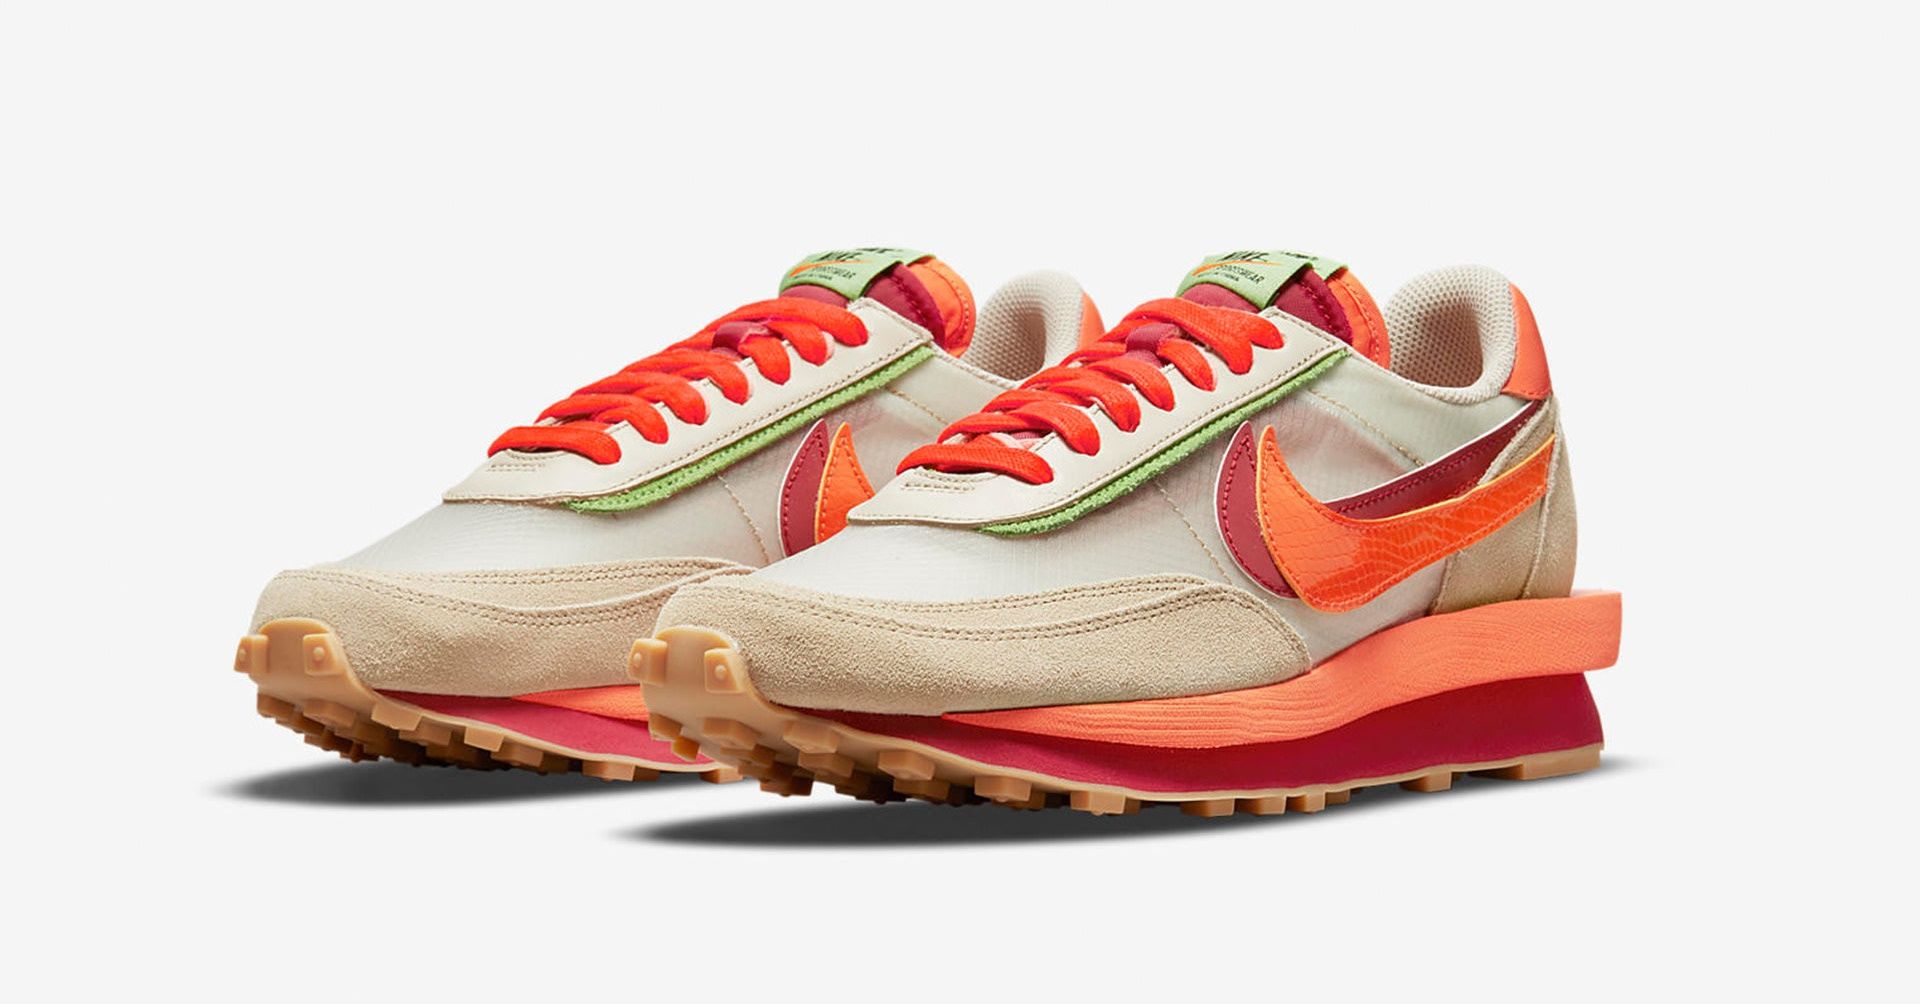 5 new sneakers to this week, including the Sacai Clot LDWaffle